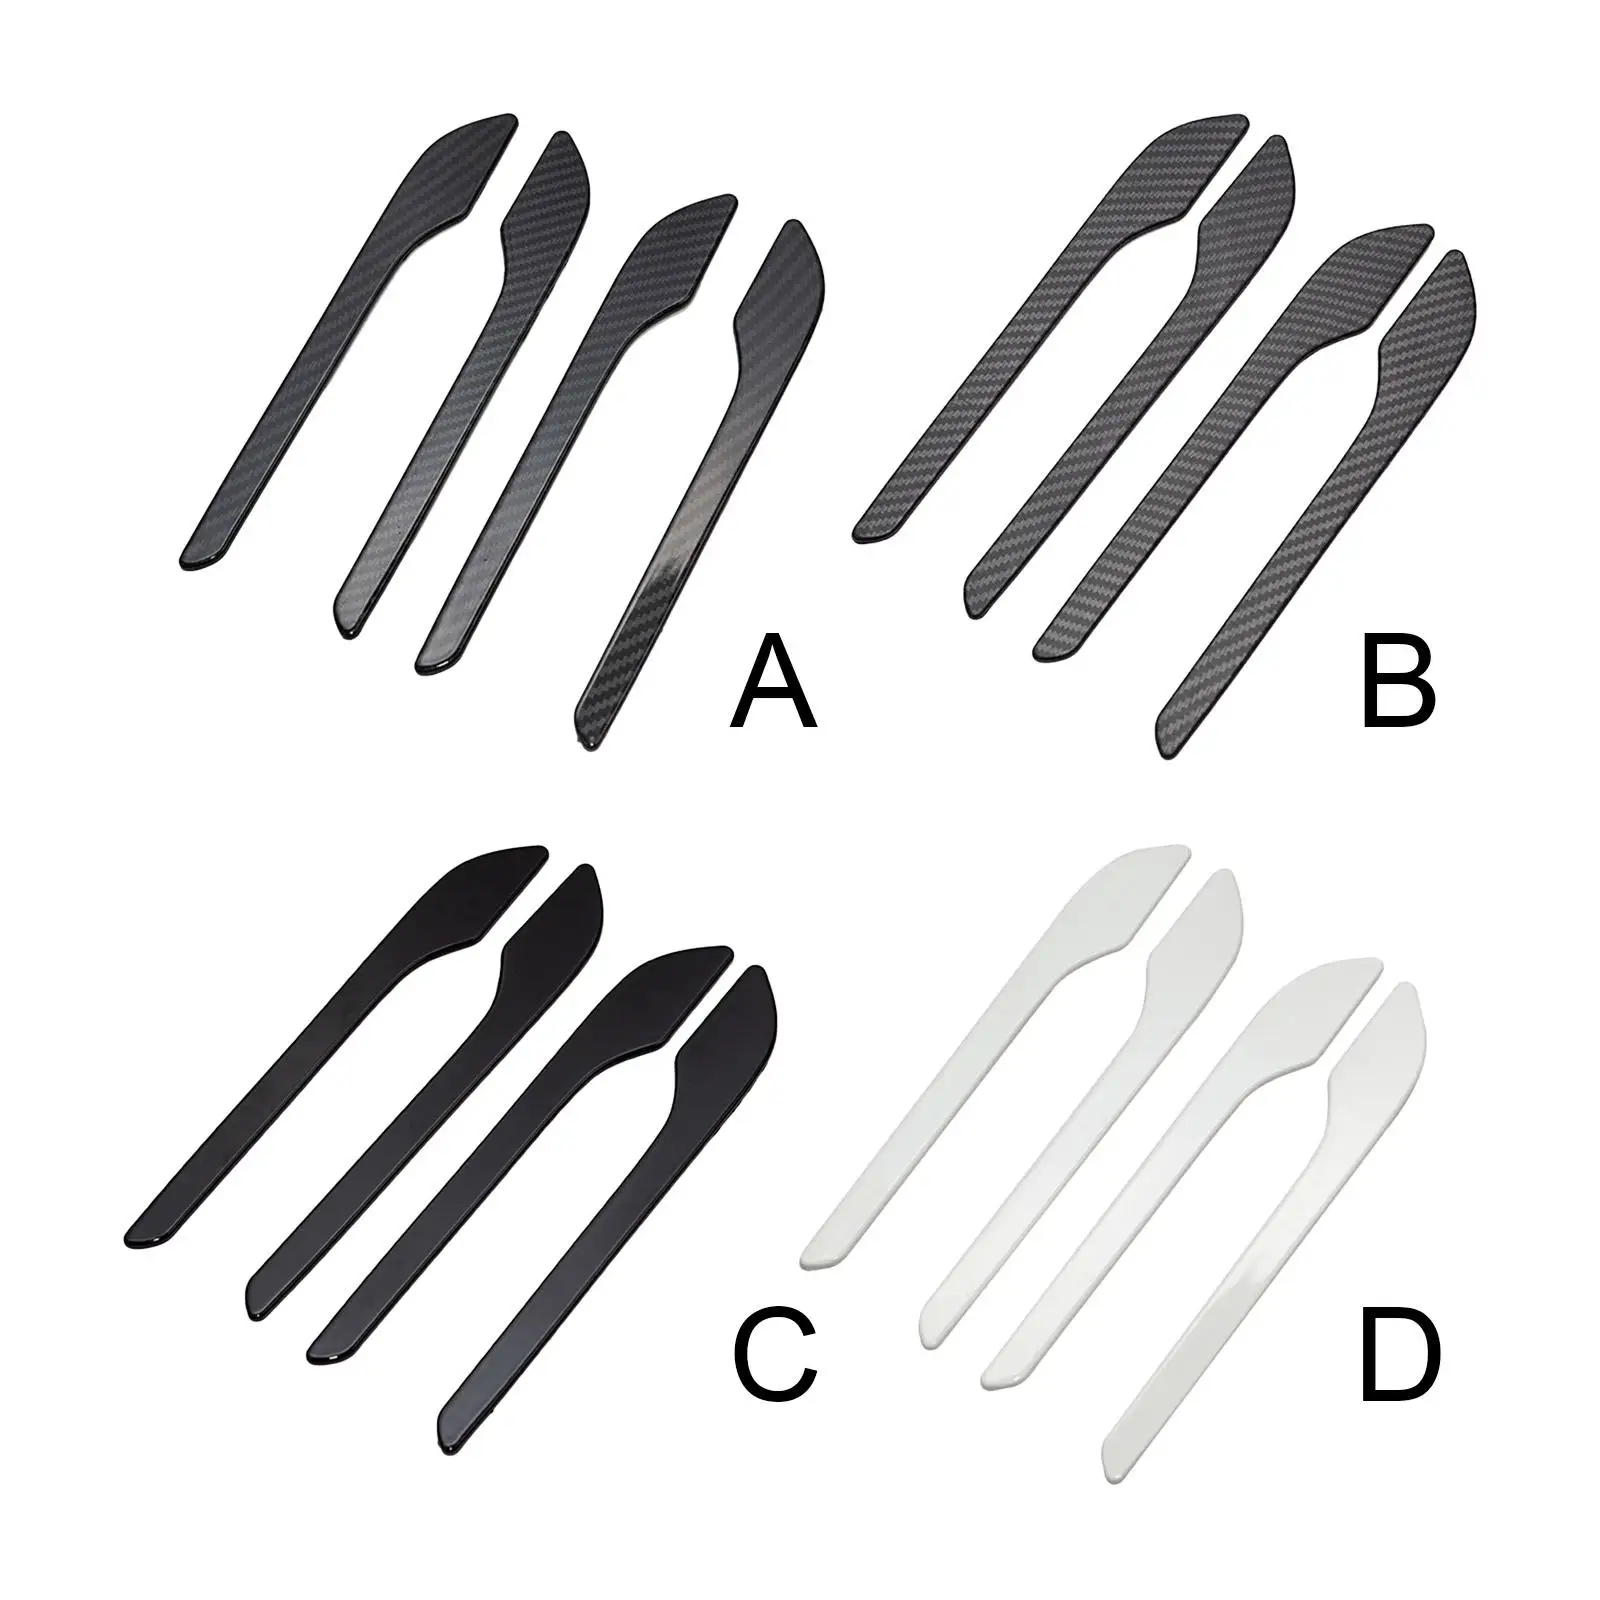 4 Pieces ABS Car Door Handle Decal Wrap Handle Cover Protector Decal Decorative Stickers Fit for Tesla Model 3 Model Y